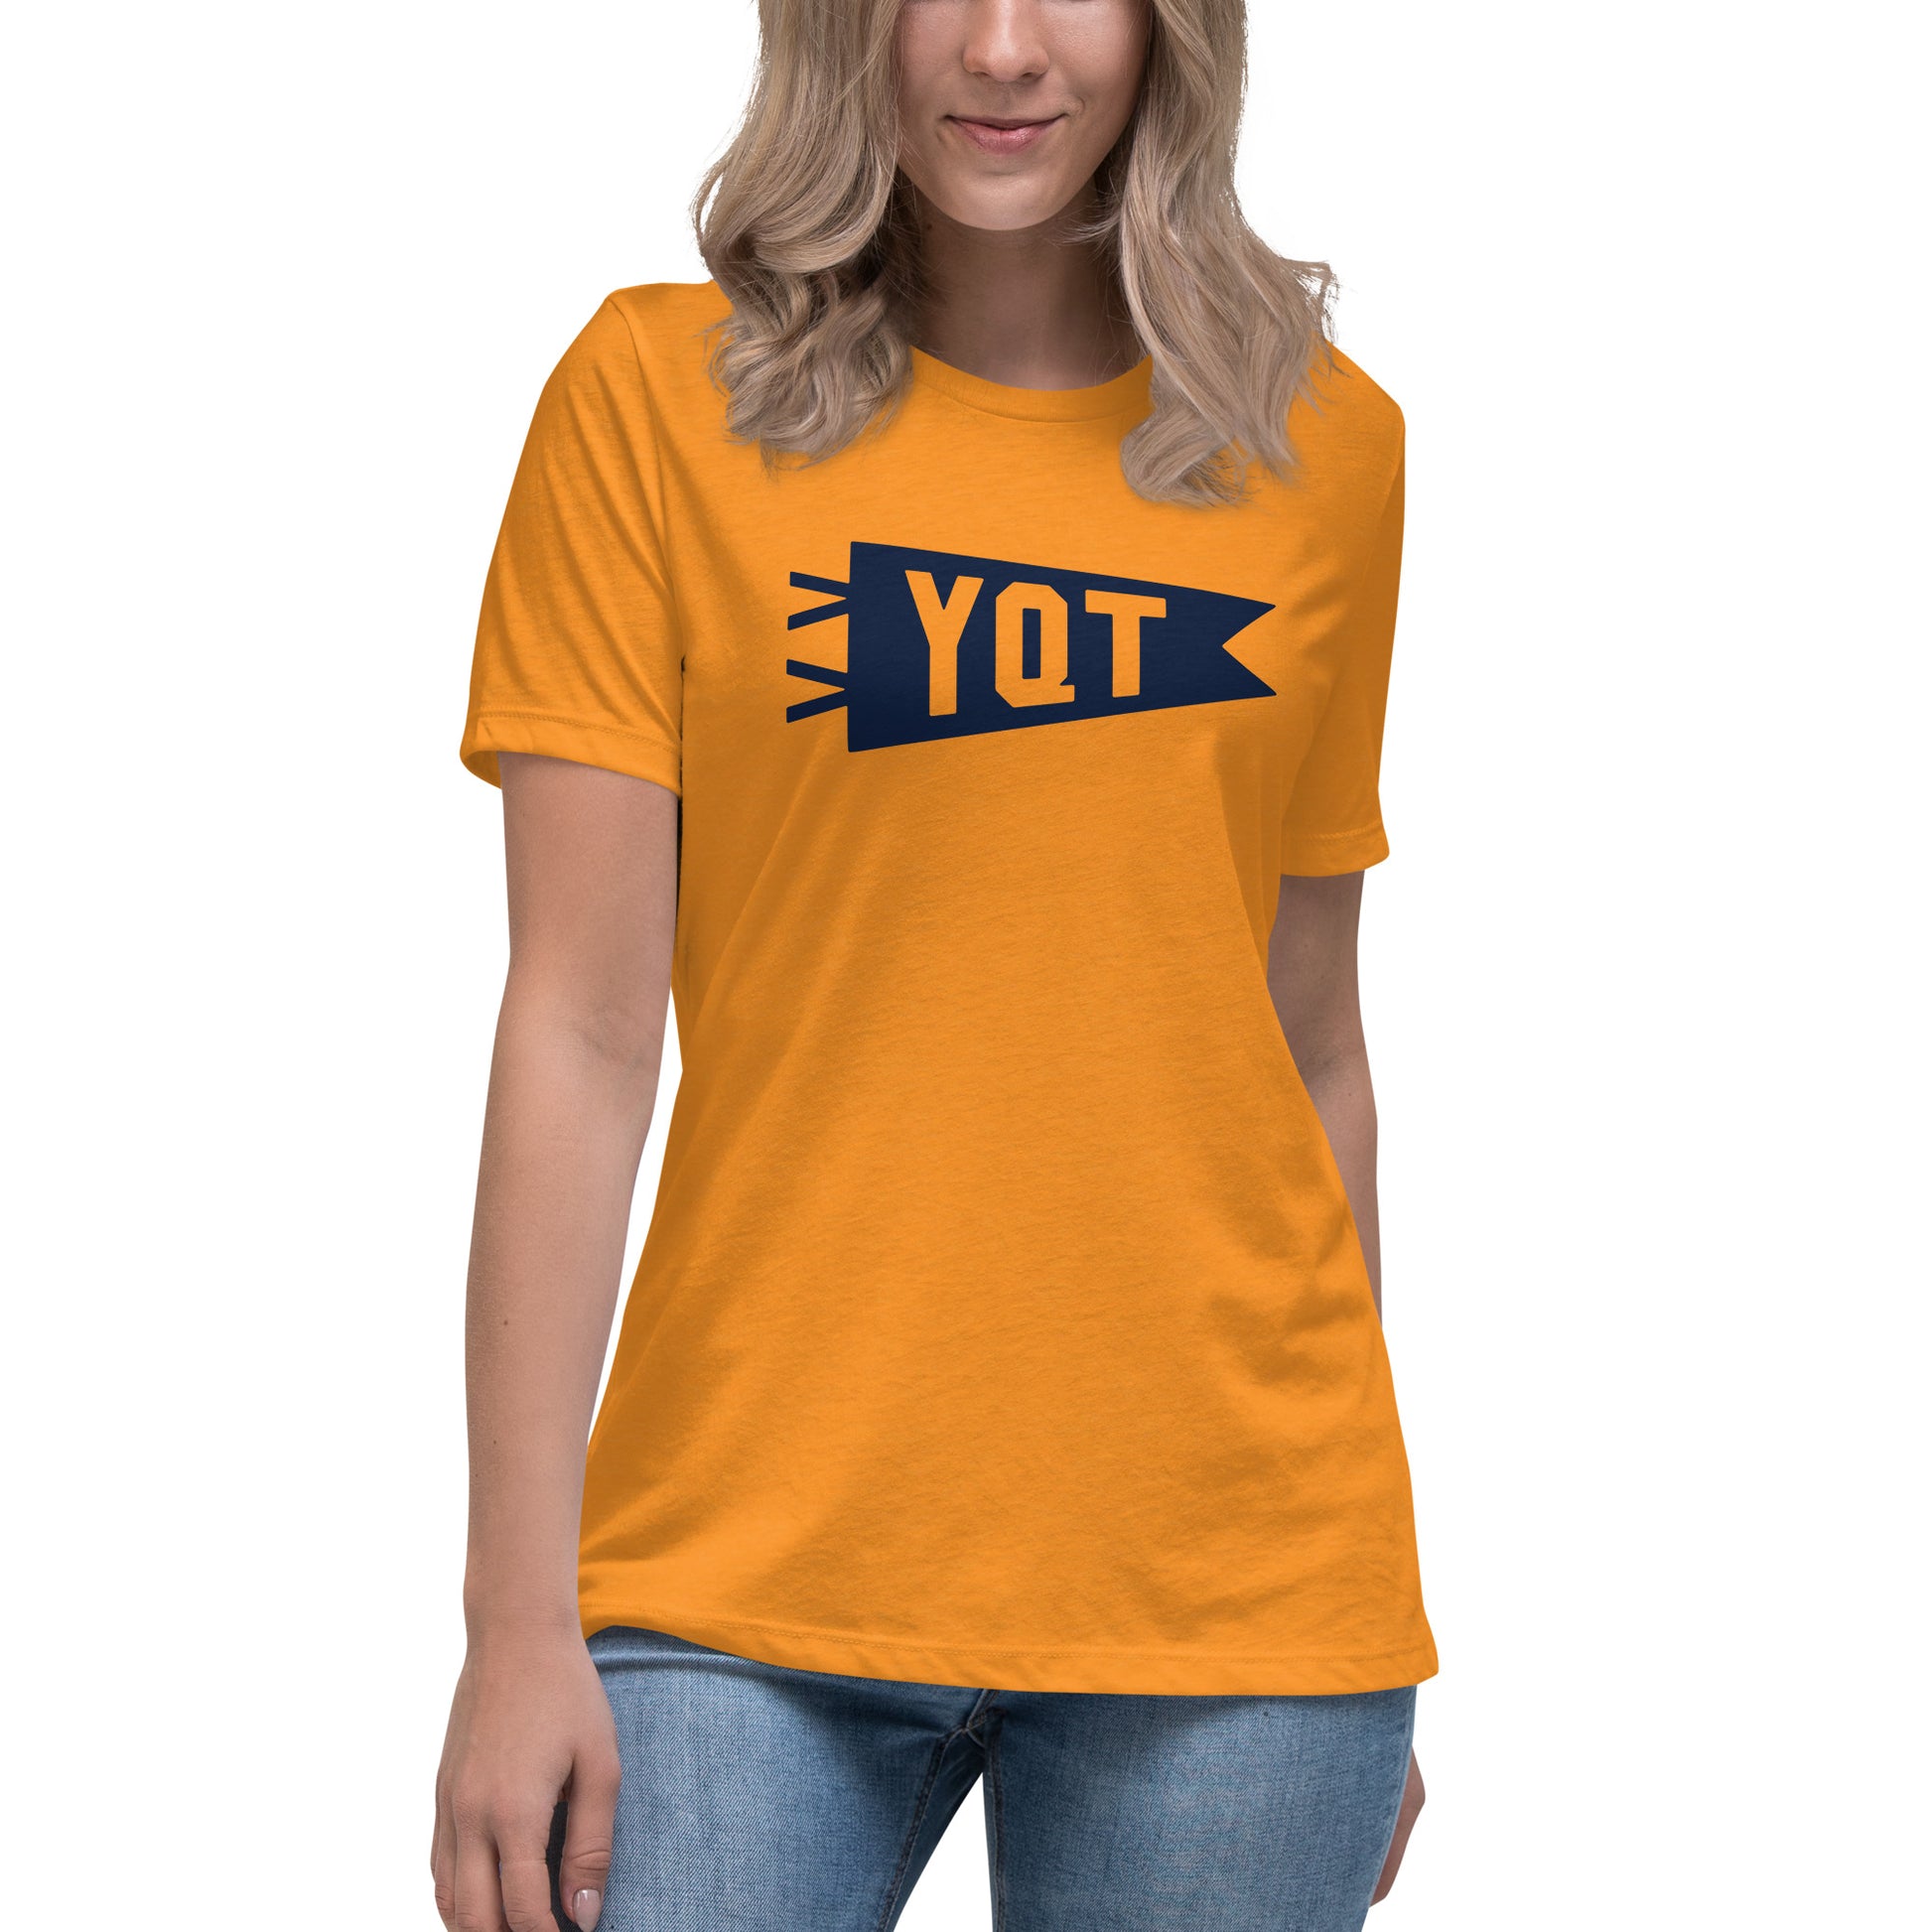 Airport Code Women's Tee - Navy Blue Graphic • YQT Thunder Bay • YHM Designs - Image 04